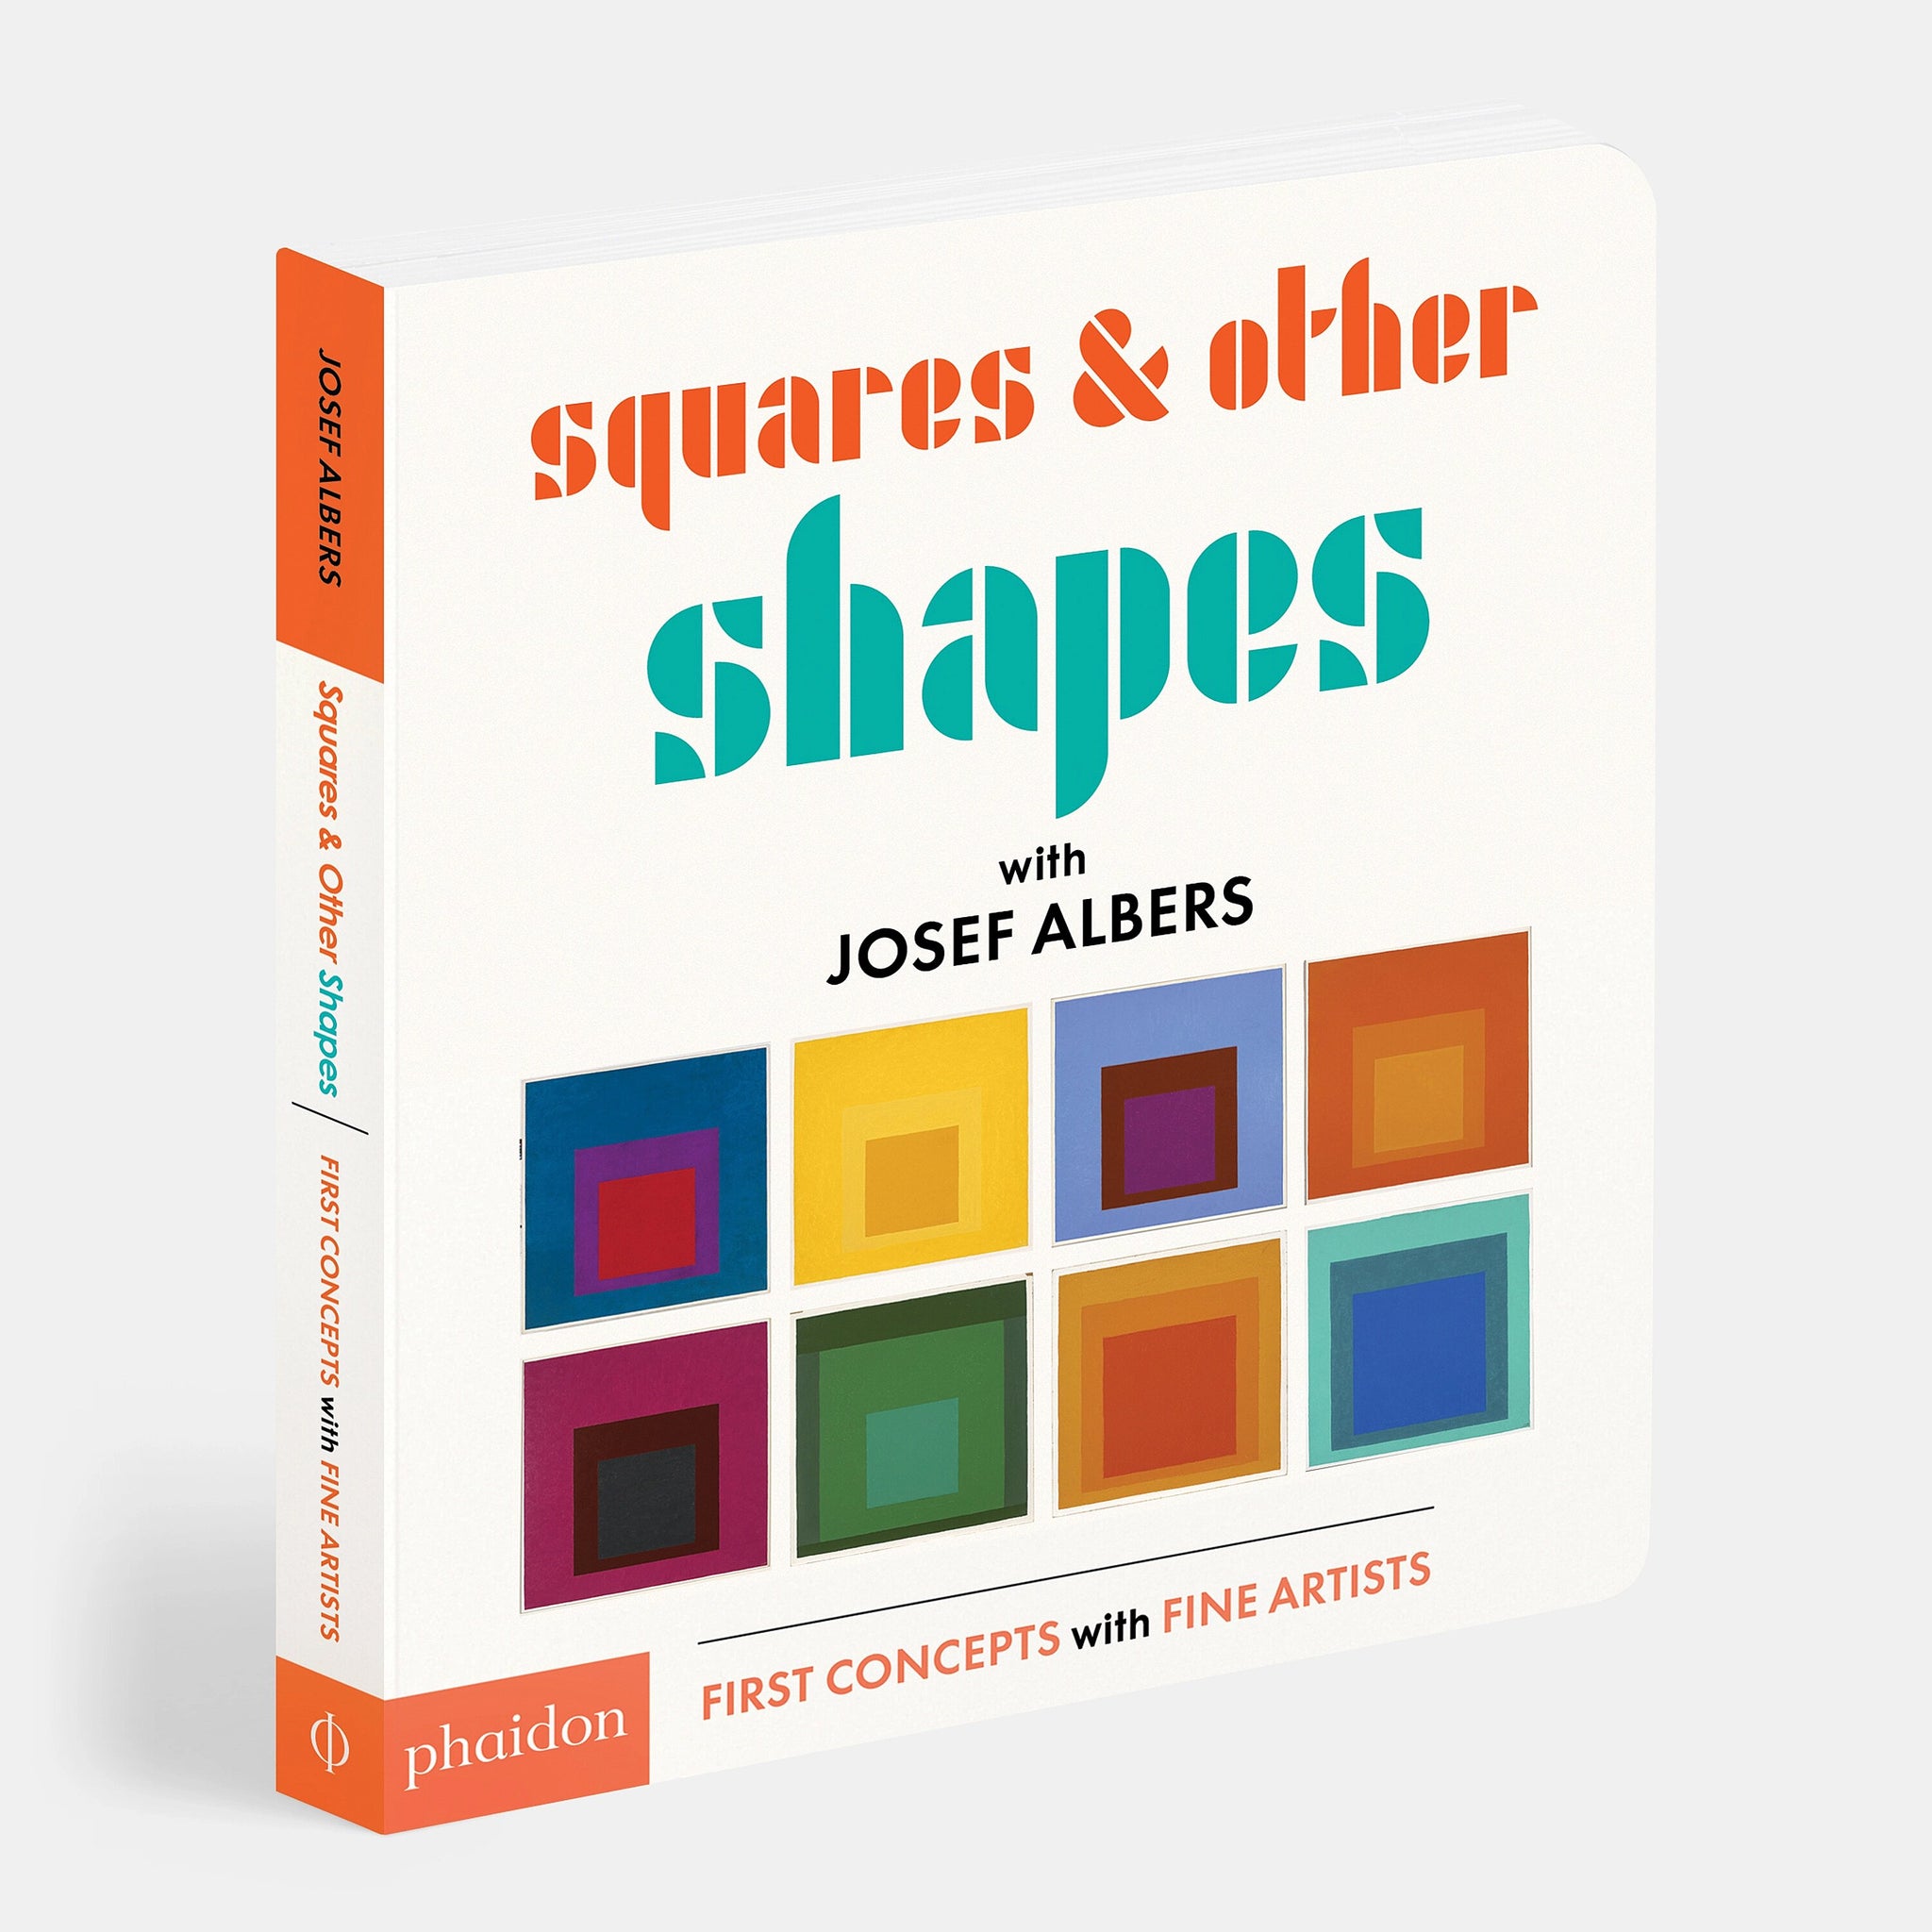 Square & Other Shapes with Josef Albers